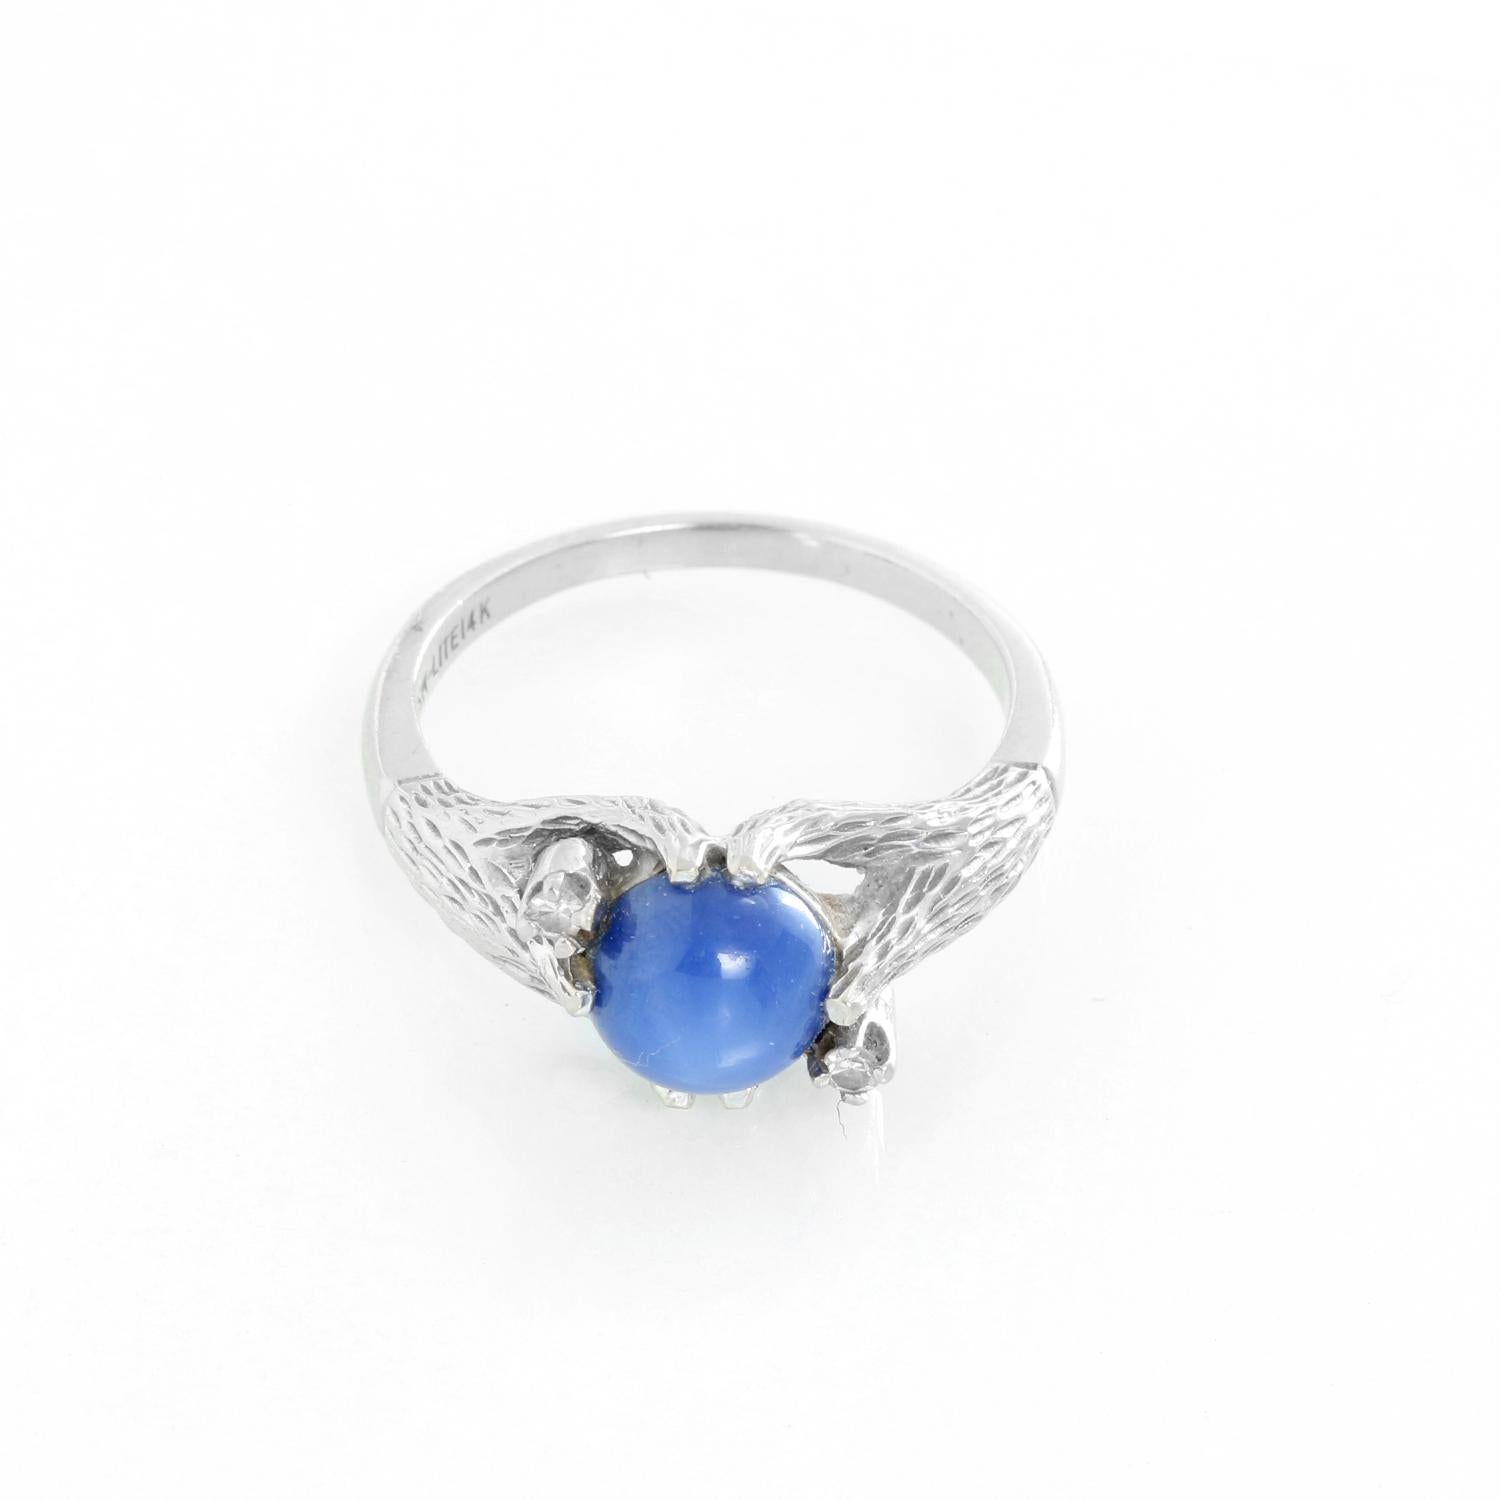 Linde Lindy Corn Flower Blue Star 14K Gold Ring - Solitare blue sapphire set in 14K white gold with cubic Zirconia on side. Size 9.